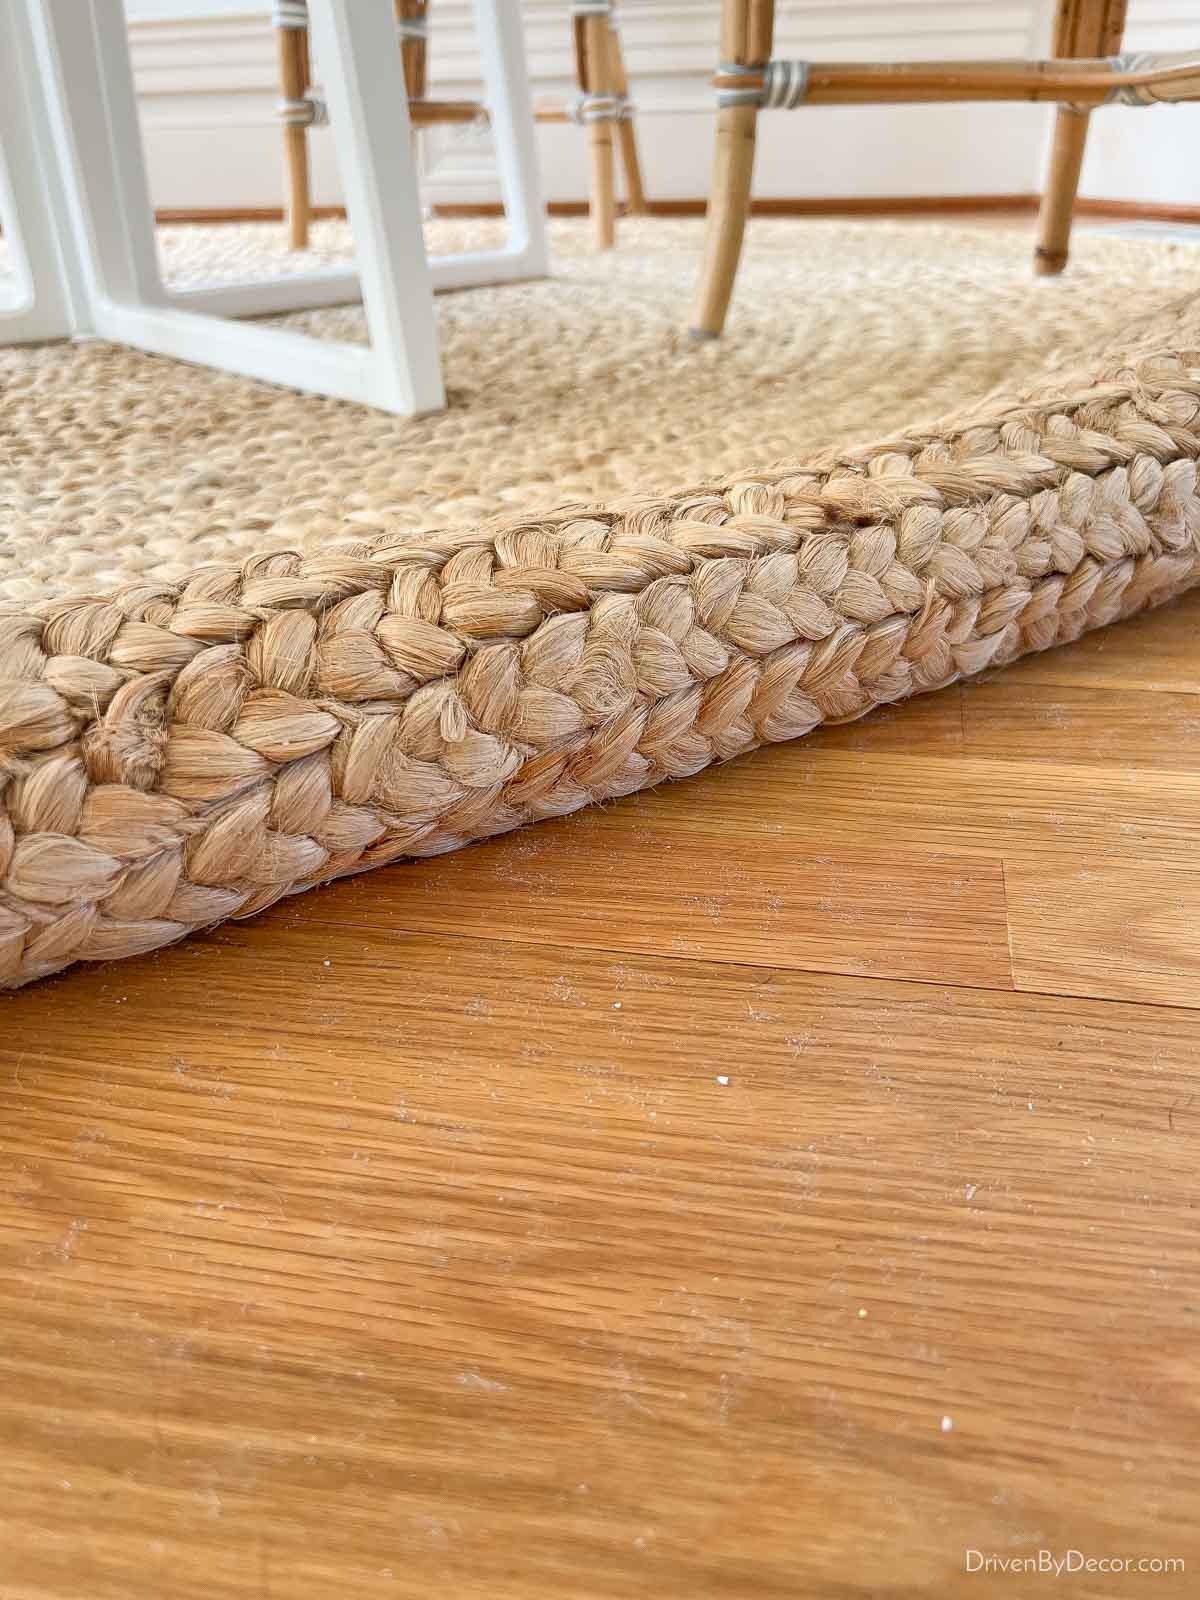 Debris that sheds from under a jute rug showing need for a rug pad